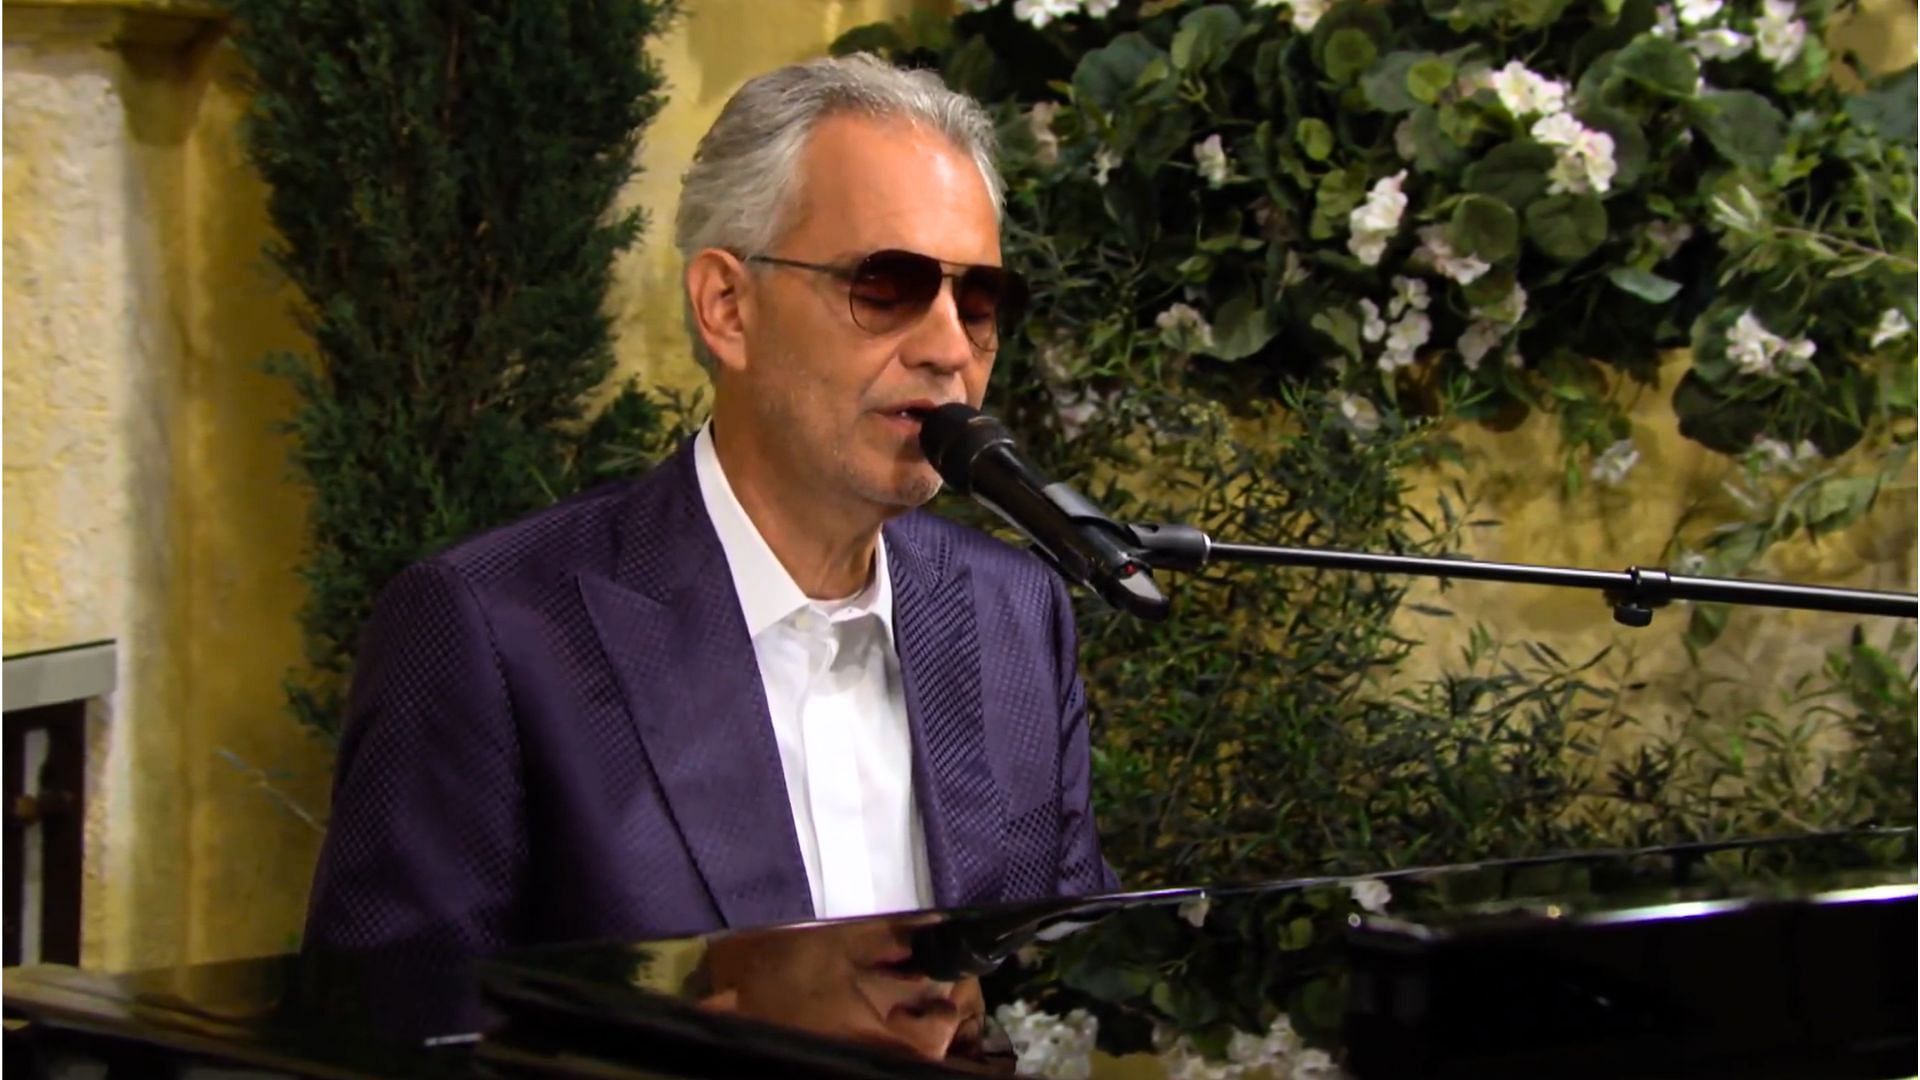 Bocelli&#039;s performance scene from the show (Image via CBS)